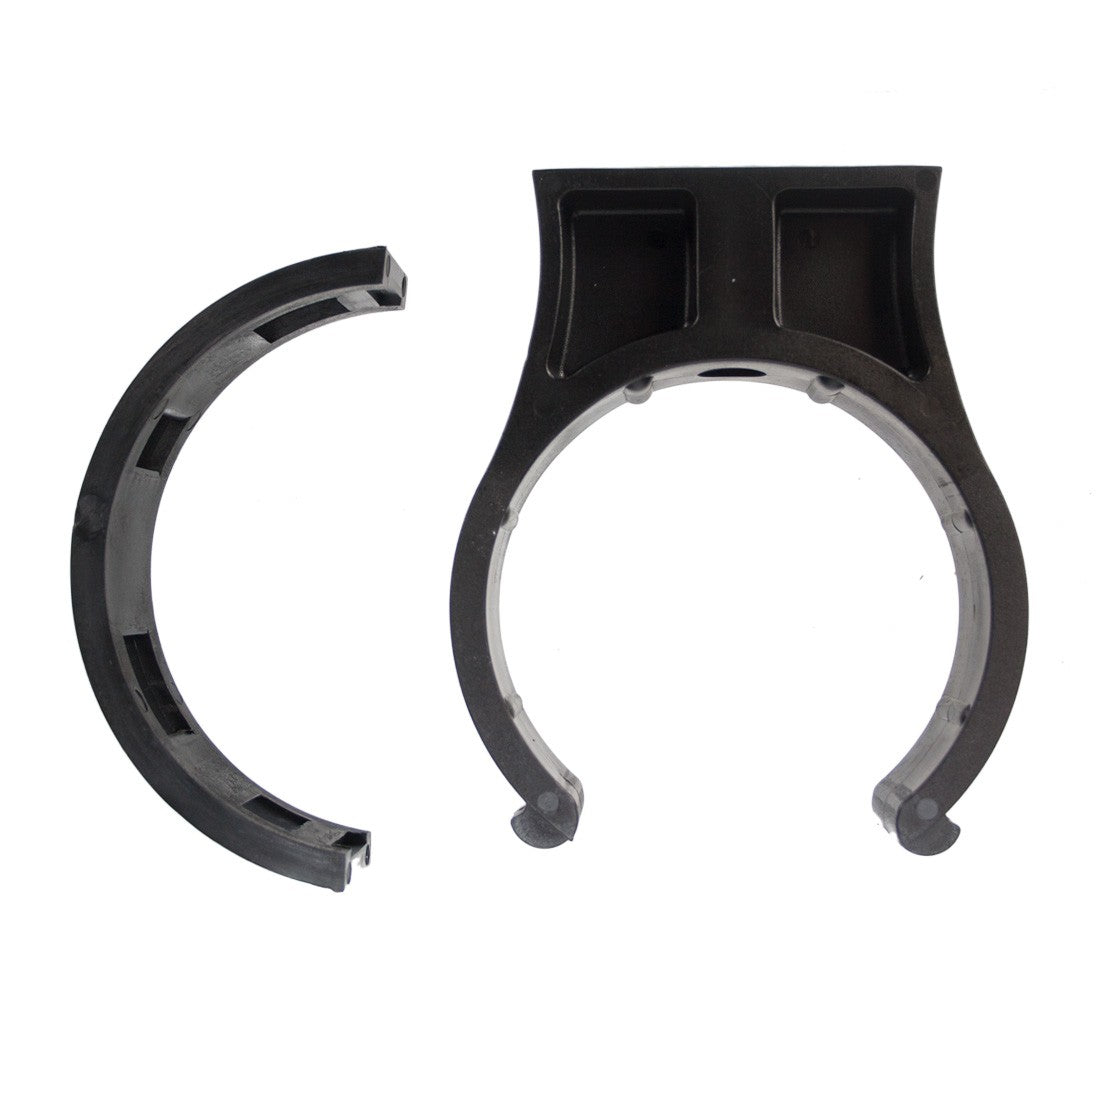 Tucker Cobra Clamps - Disassembled Clamp View